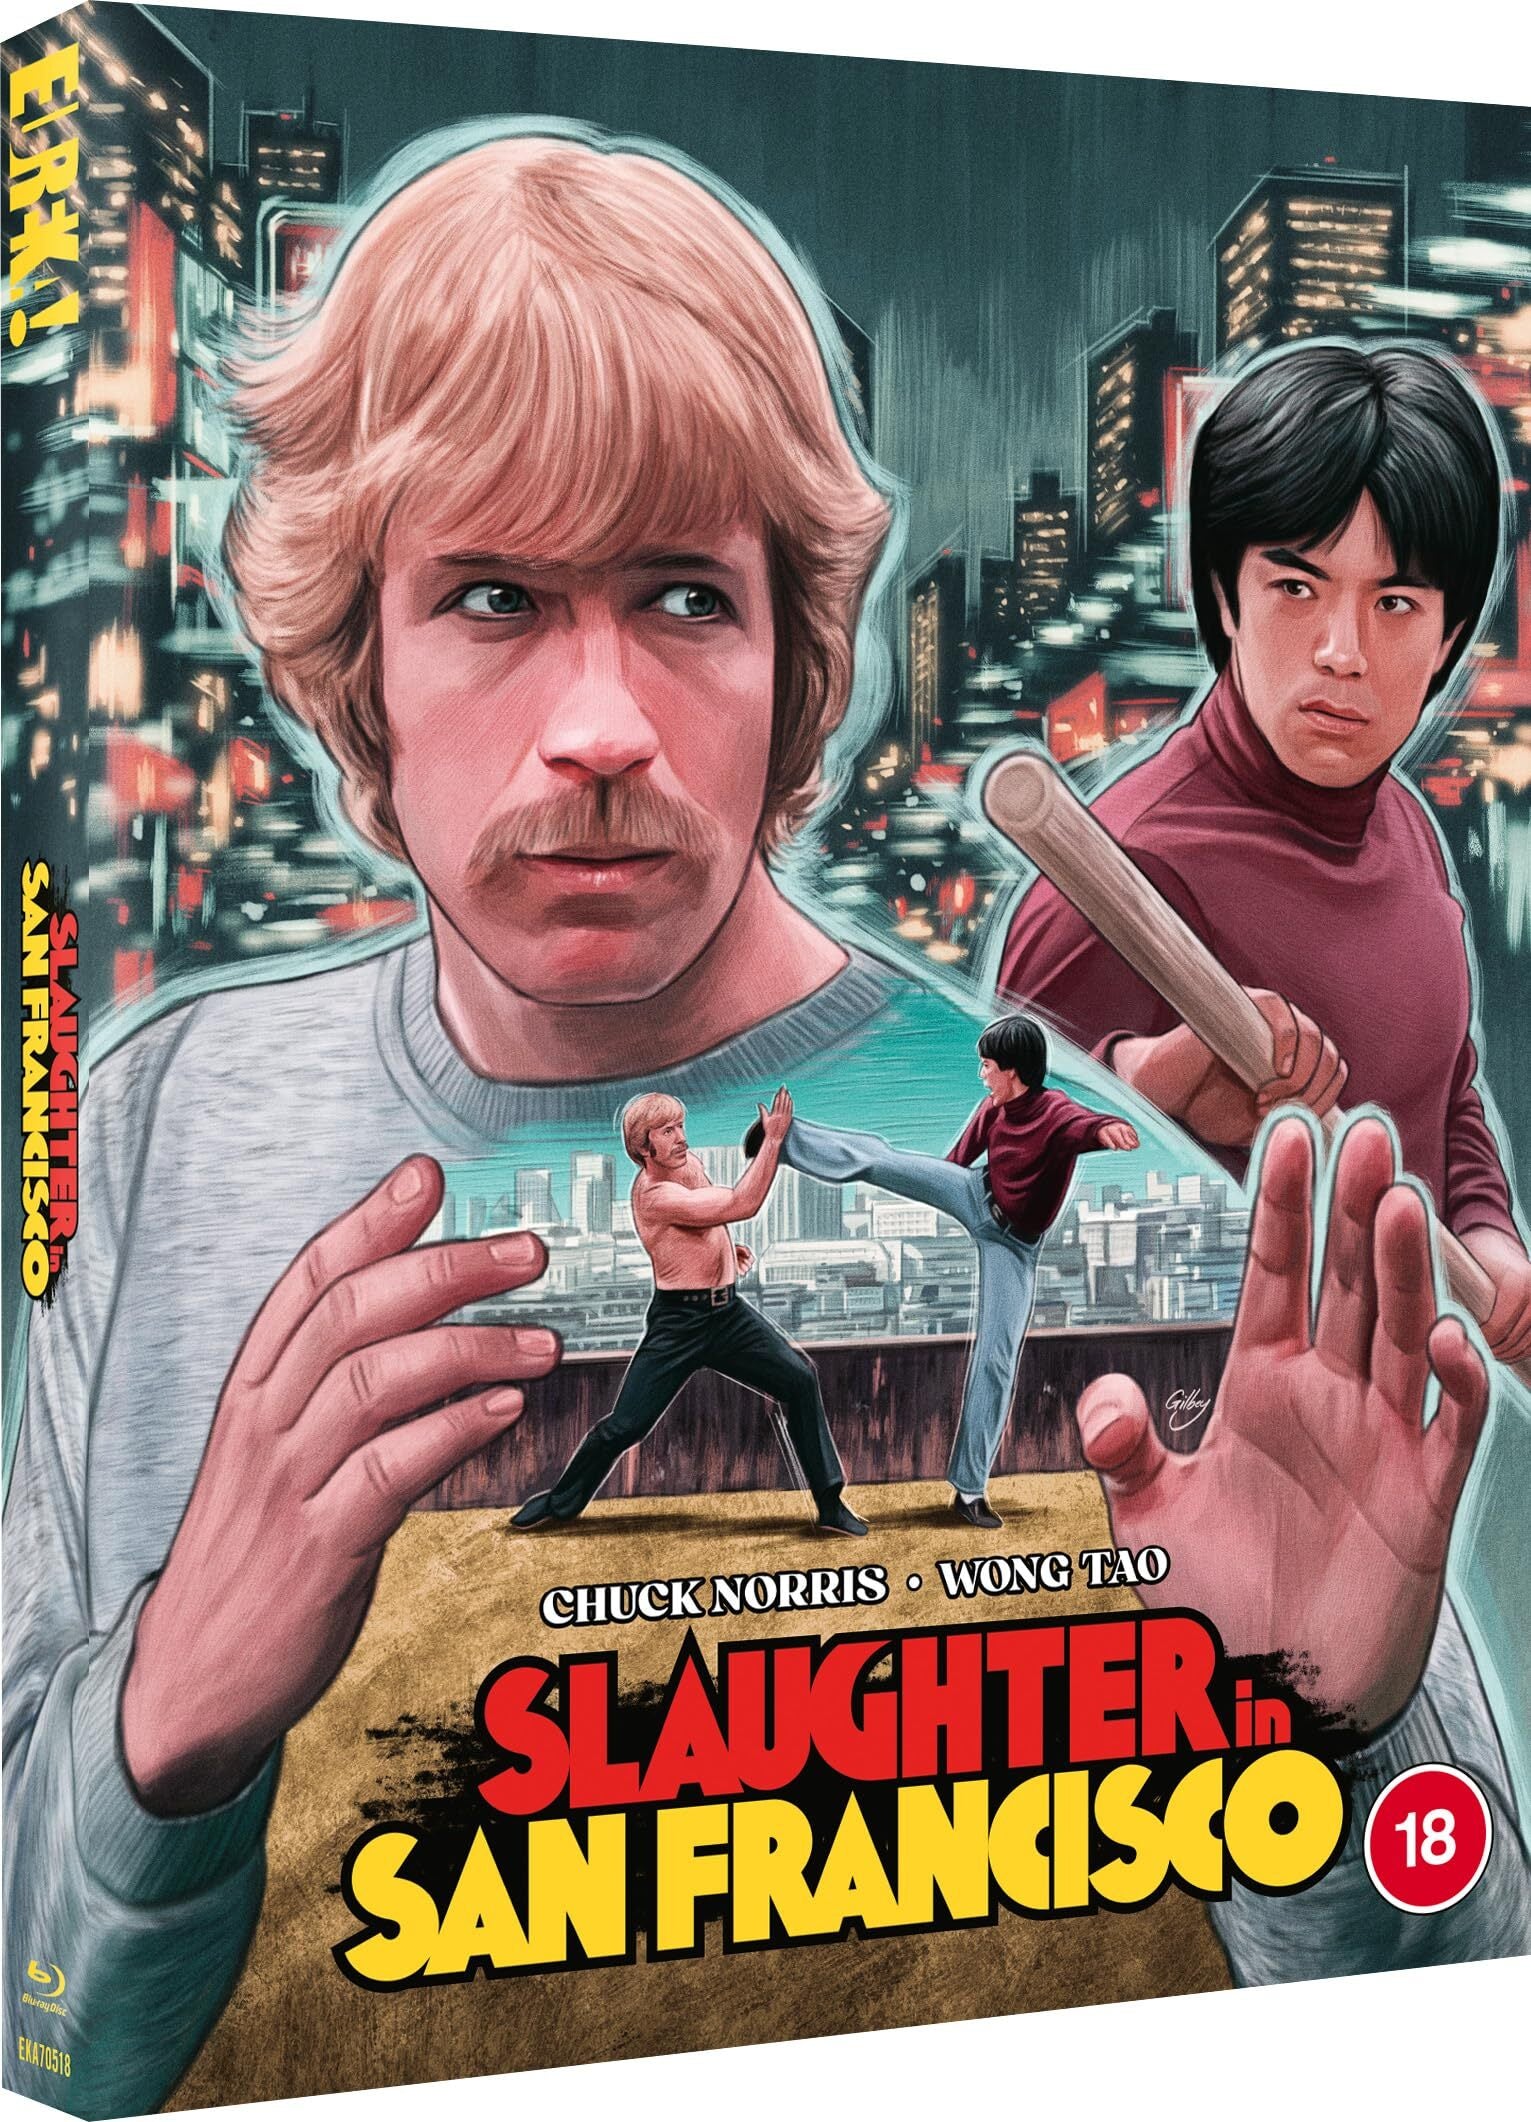 SLAUGHTER IN SAN FRANCISCO (REGION B IMPORT - LIMITED EDITION) BLU-RAY